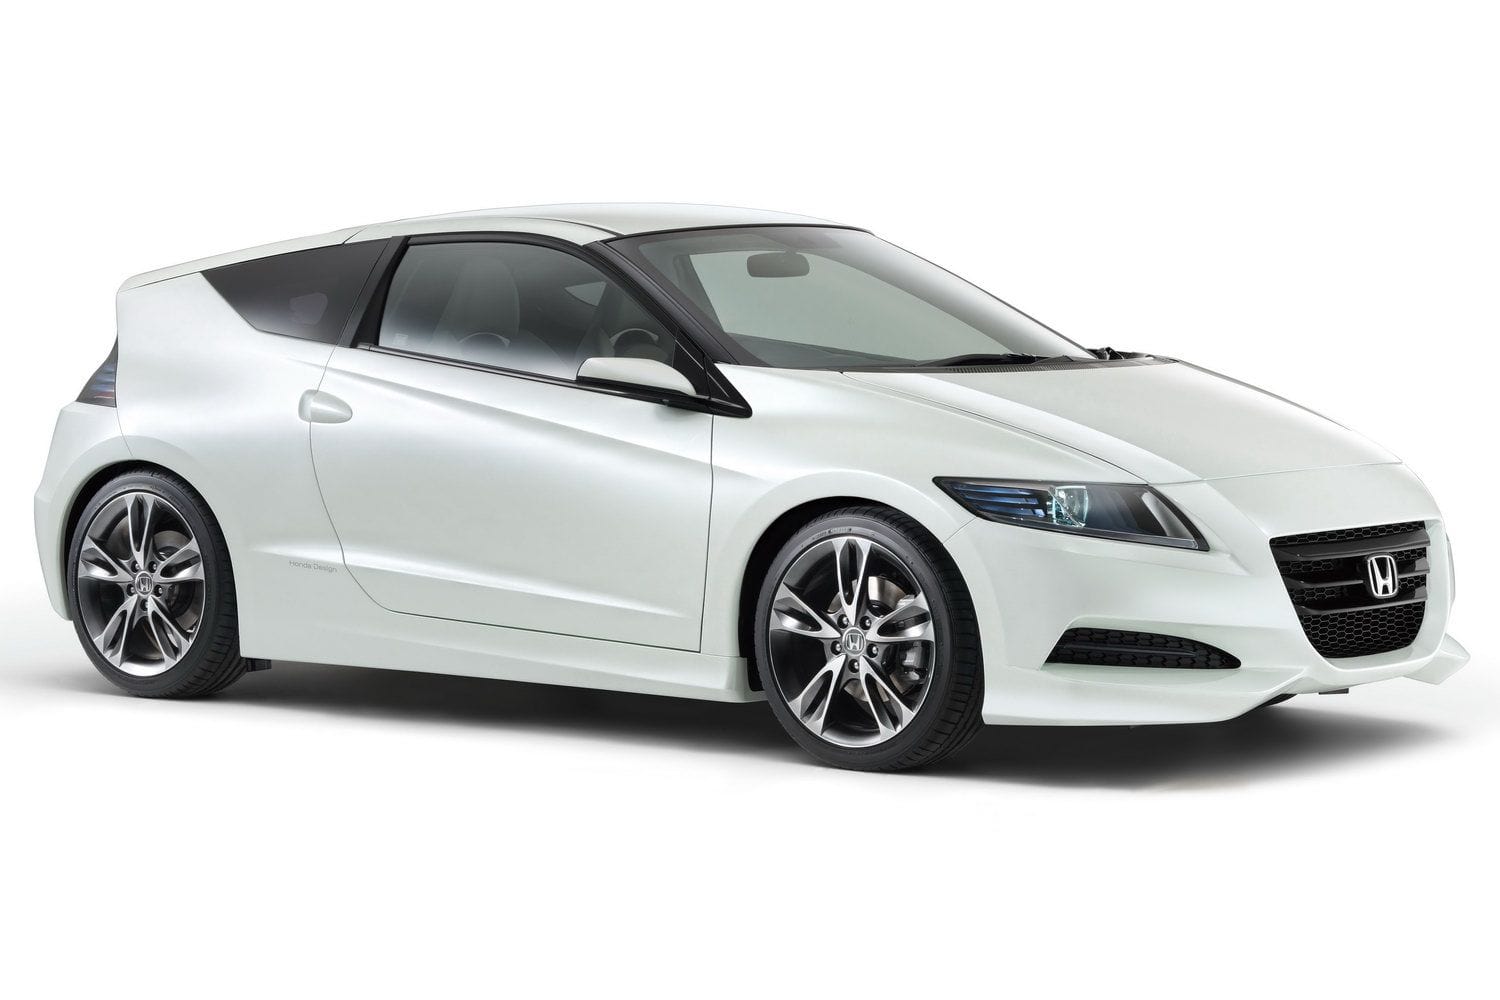 First Official Photos of the Honda CR-Z Hybrid Sports Coupe